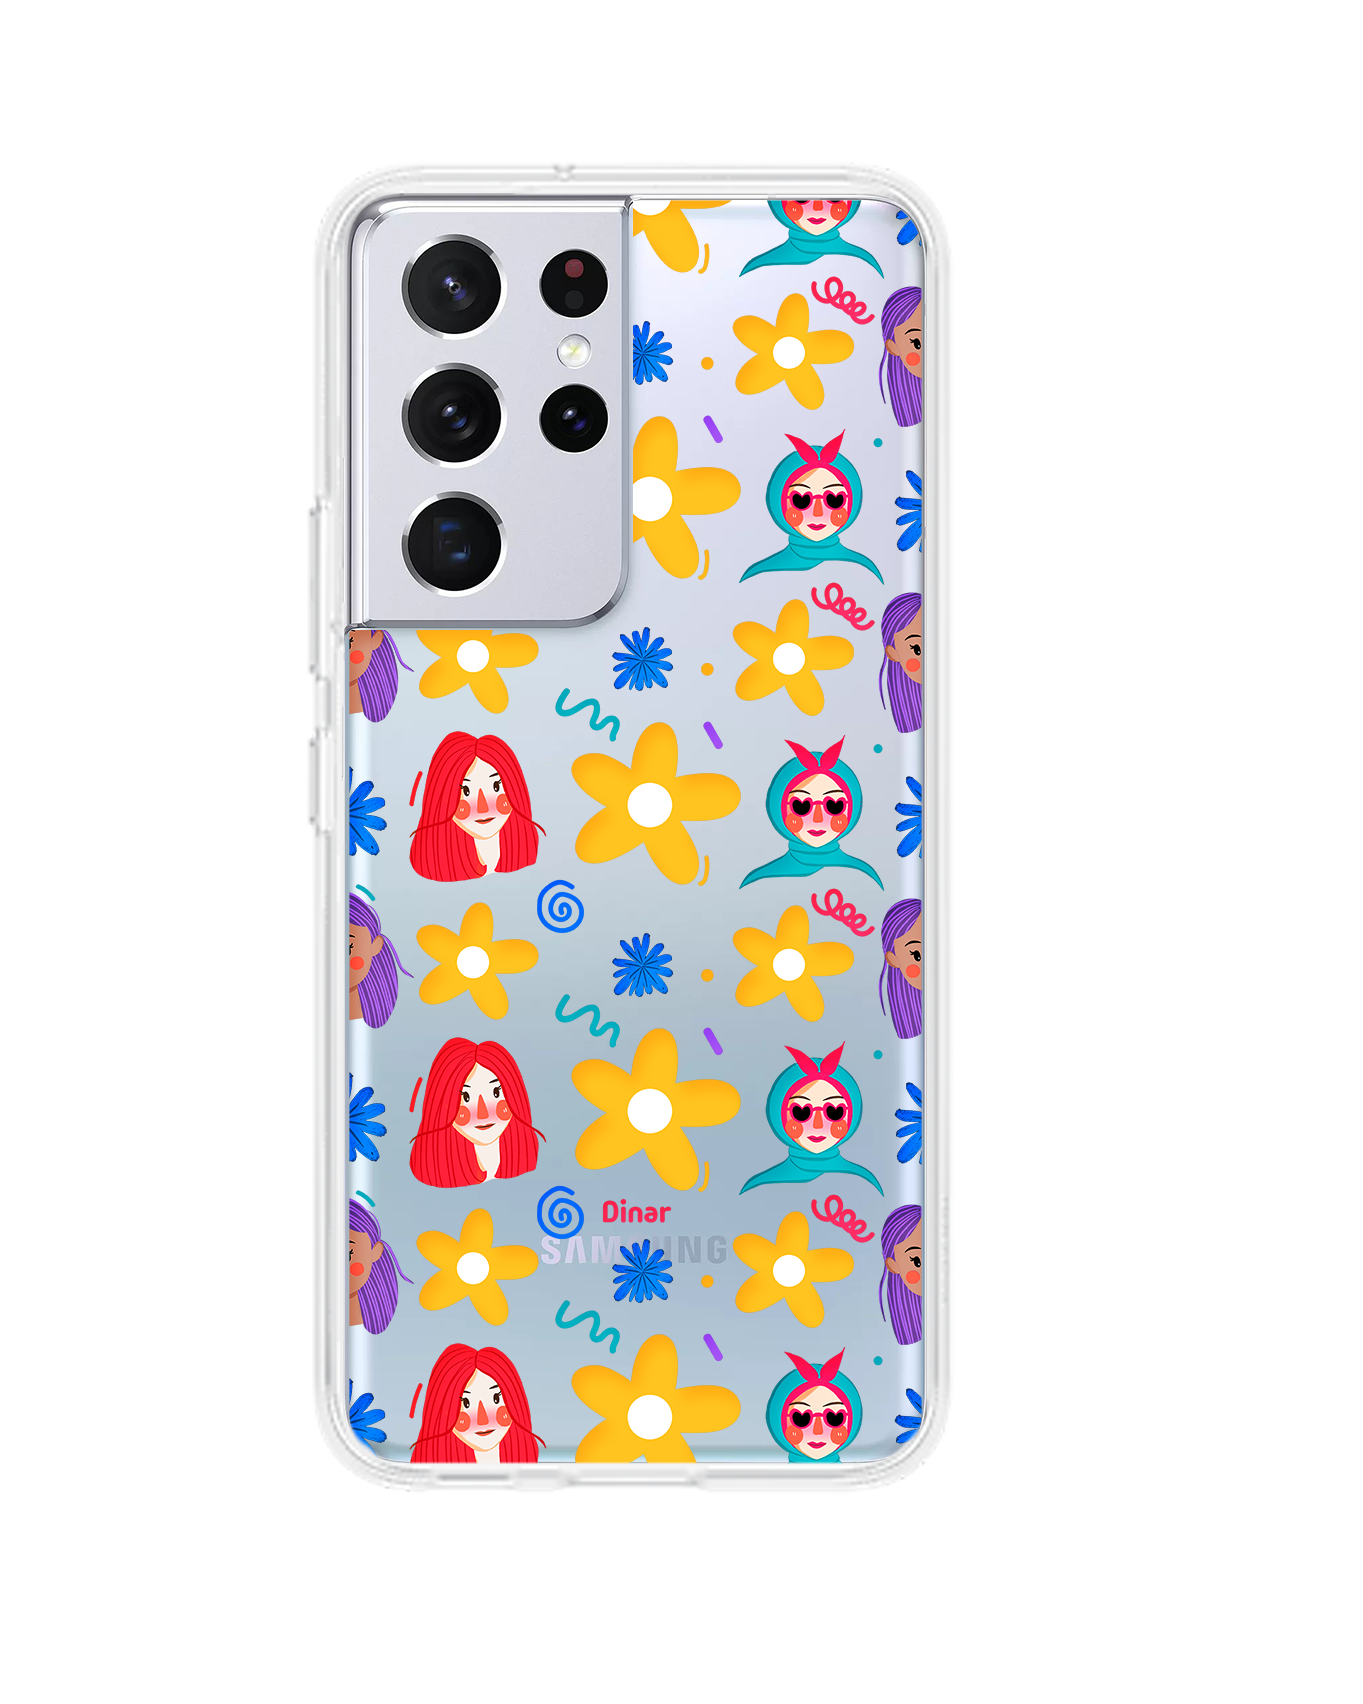 Android Rearguard Hybrid Case - Daisy Faces